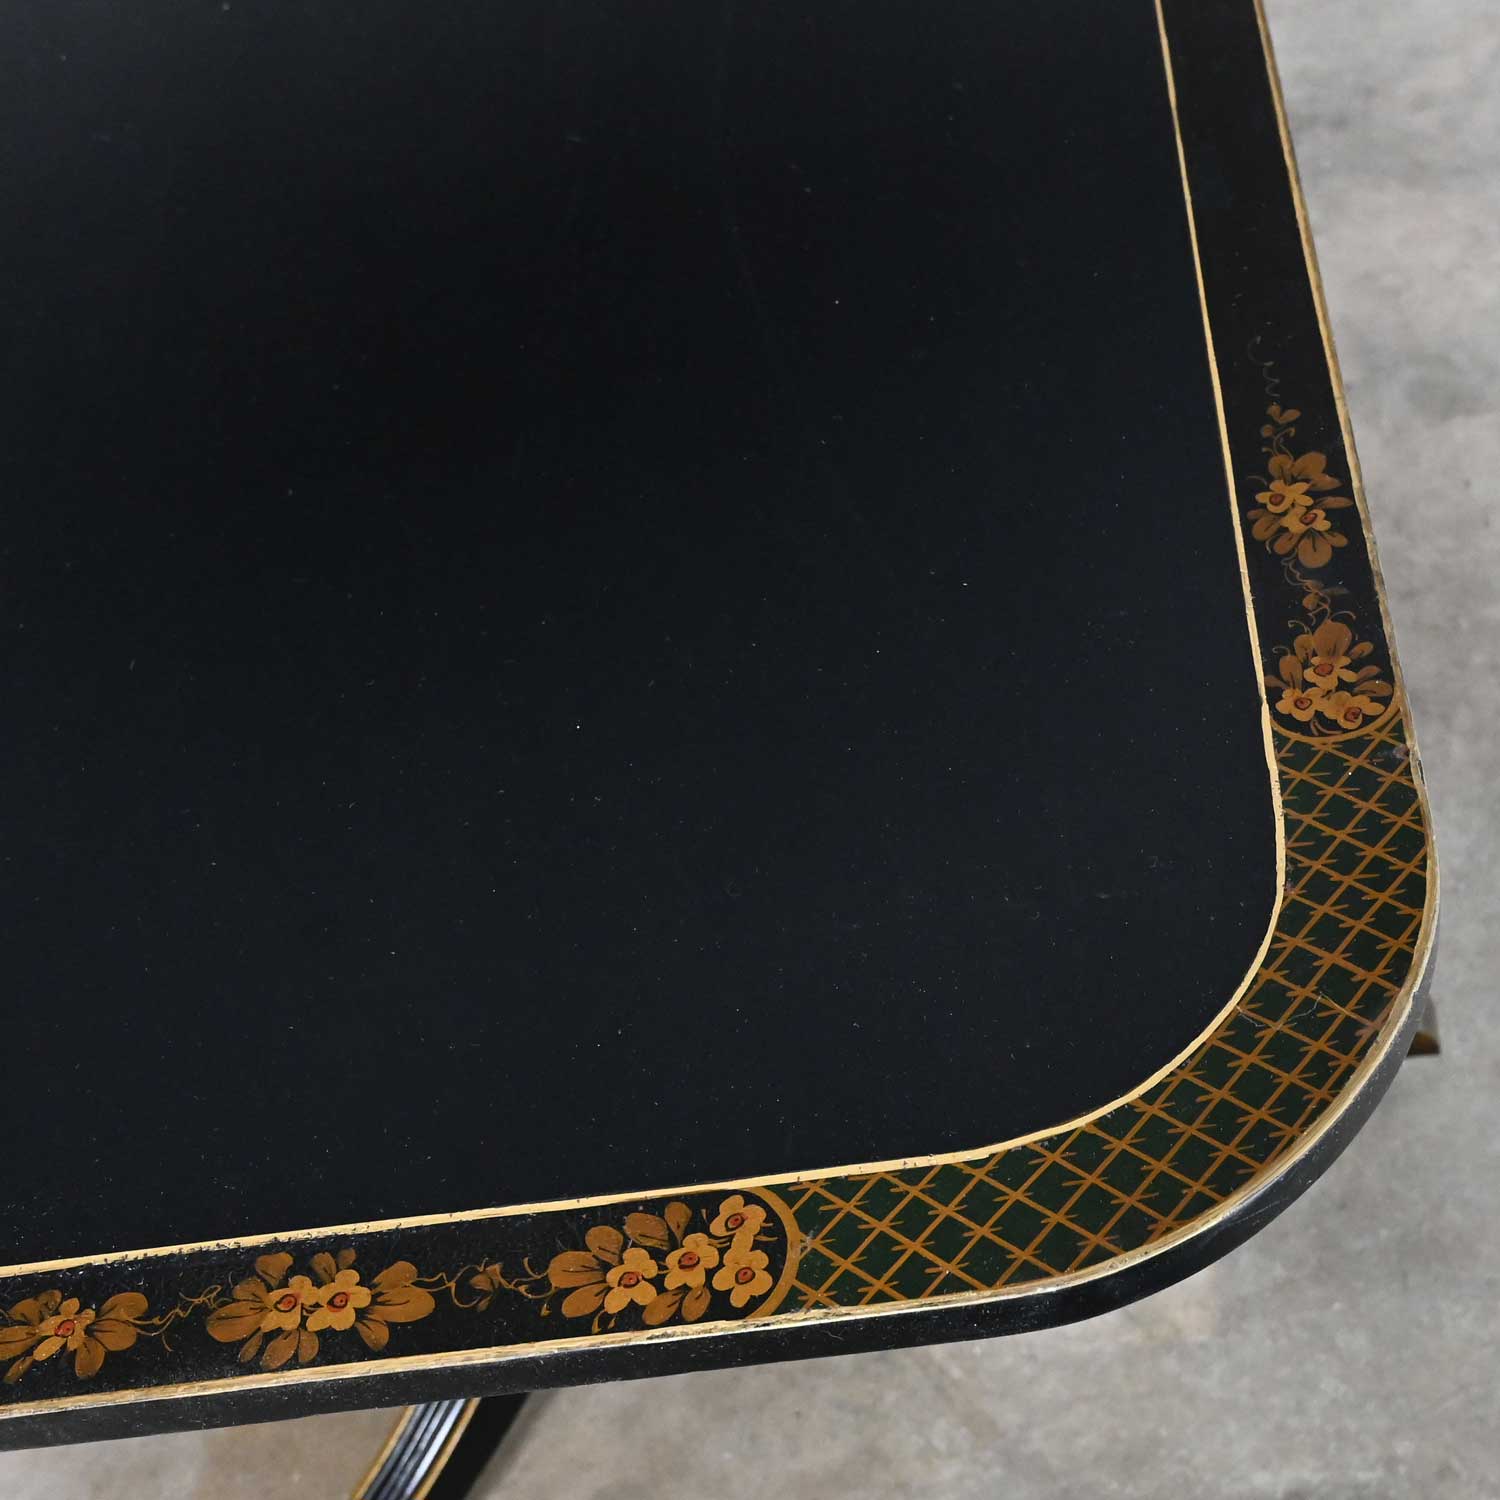 Mid-20th Century Chinoiserie Regency Style Union National Black Painted & Gilt Dining Table Double Tripod Base